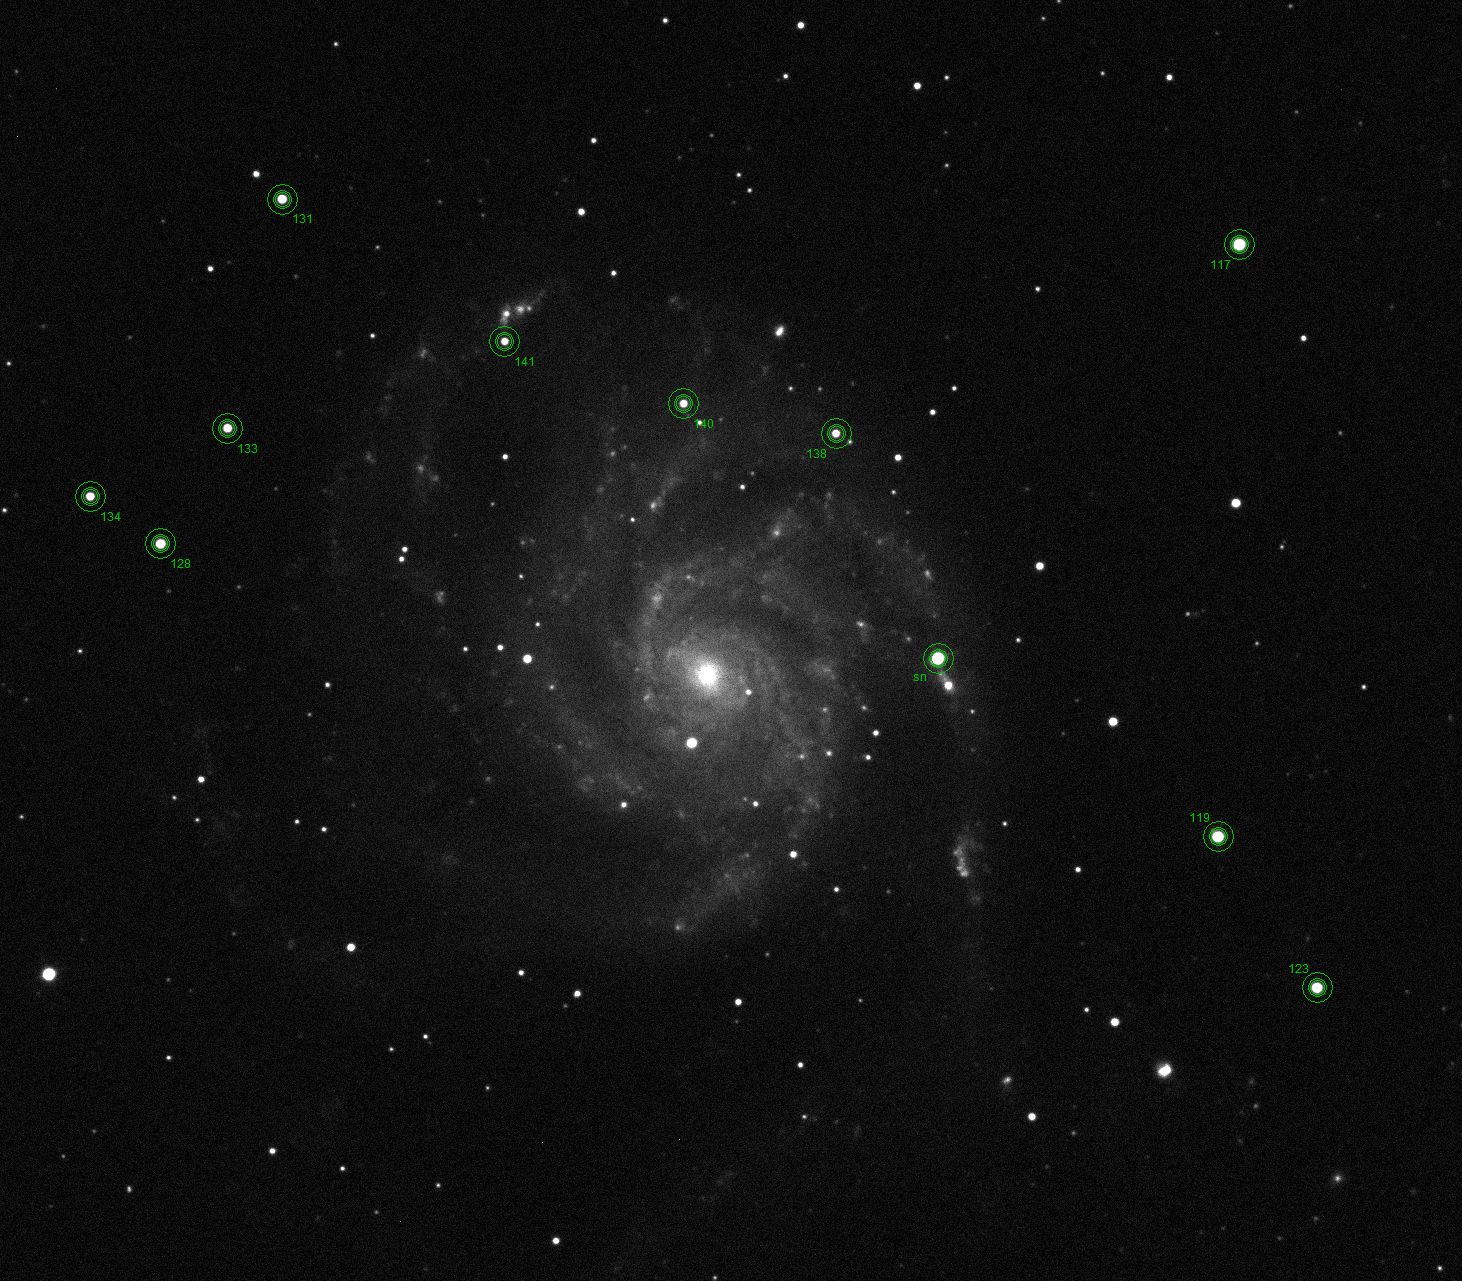 Calibrated 5-minute exposure of M101 with reference stars tagged